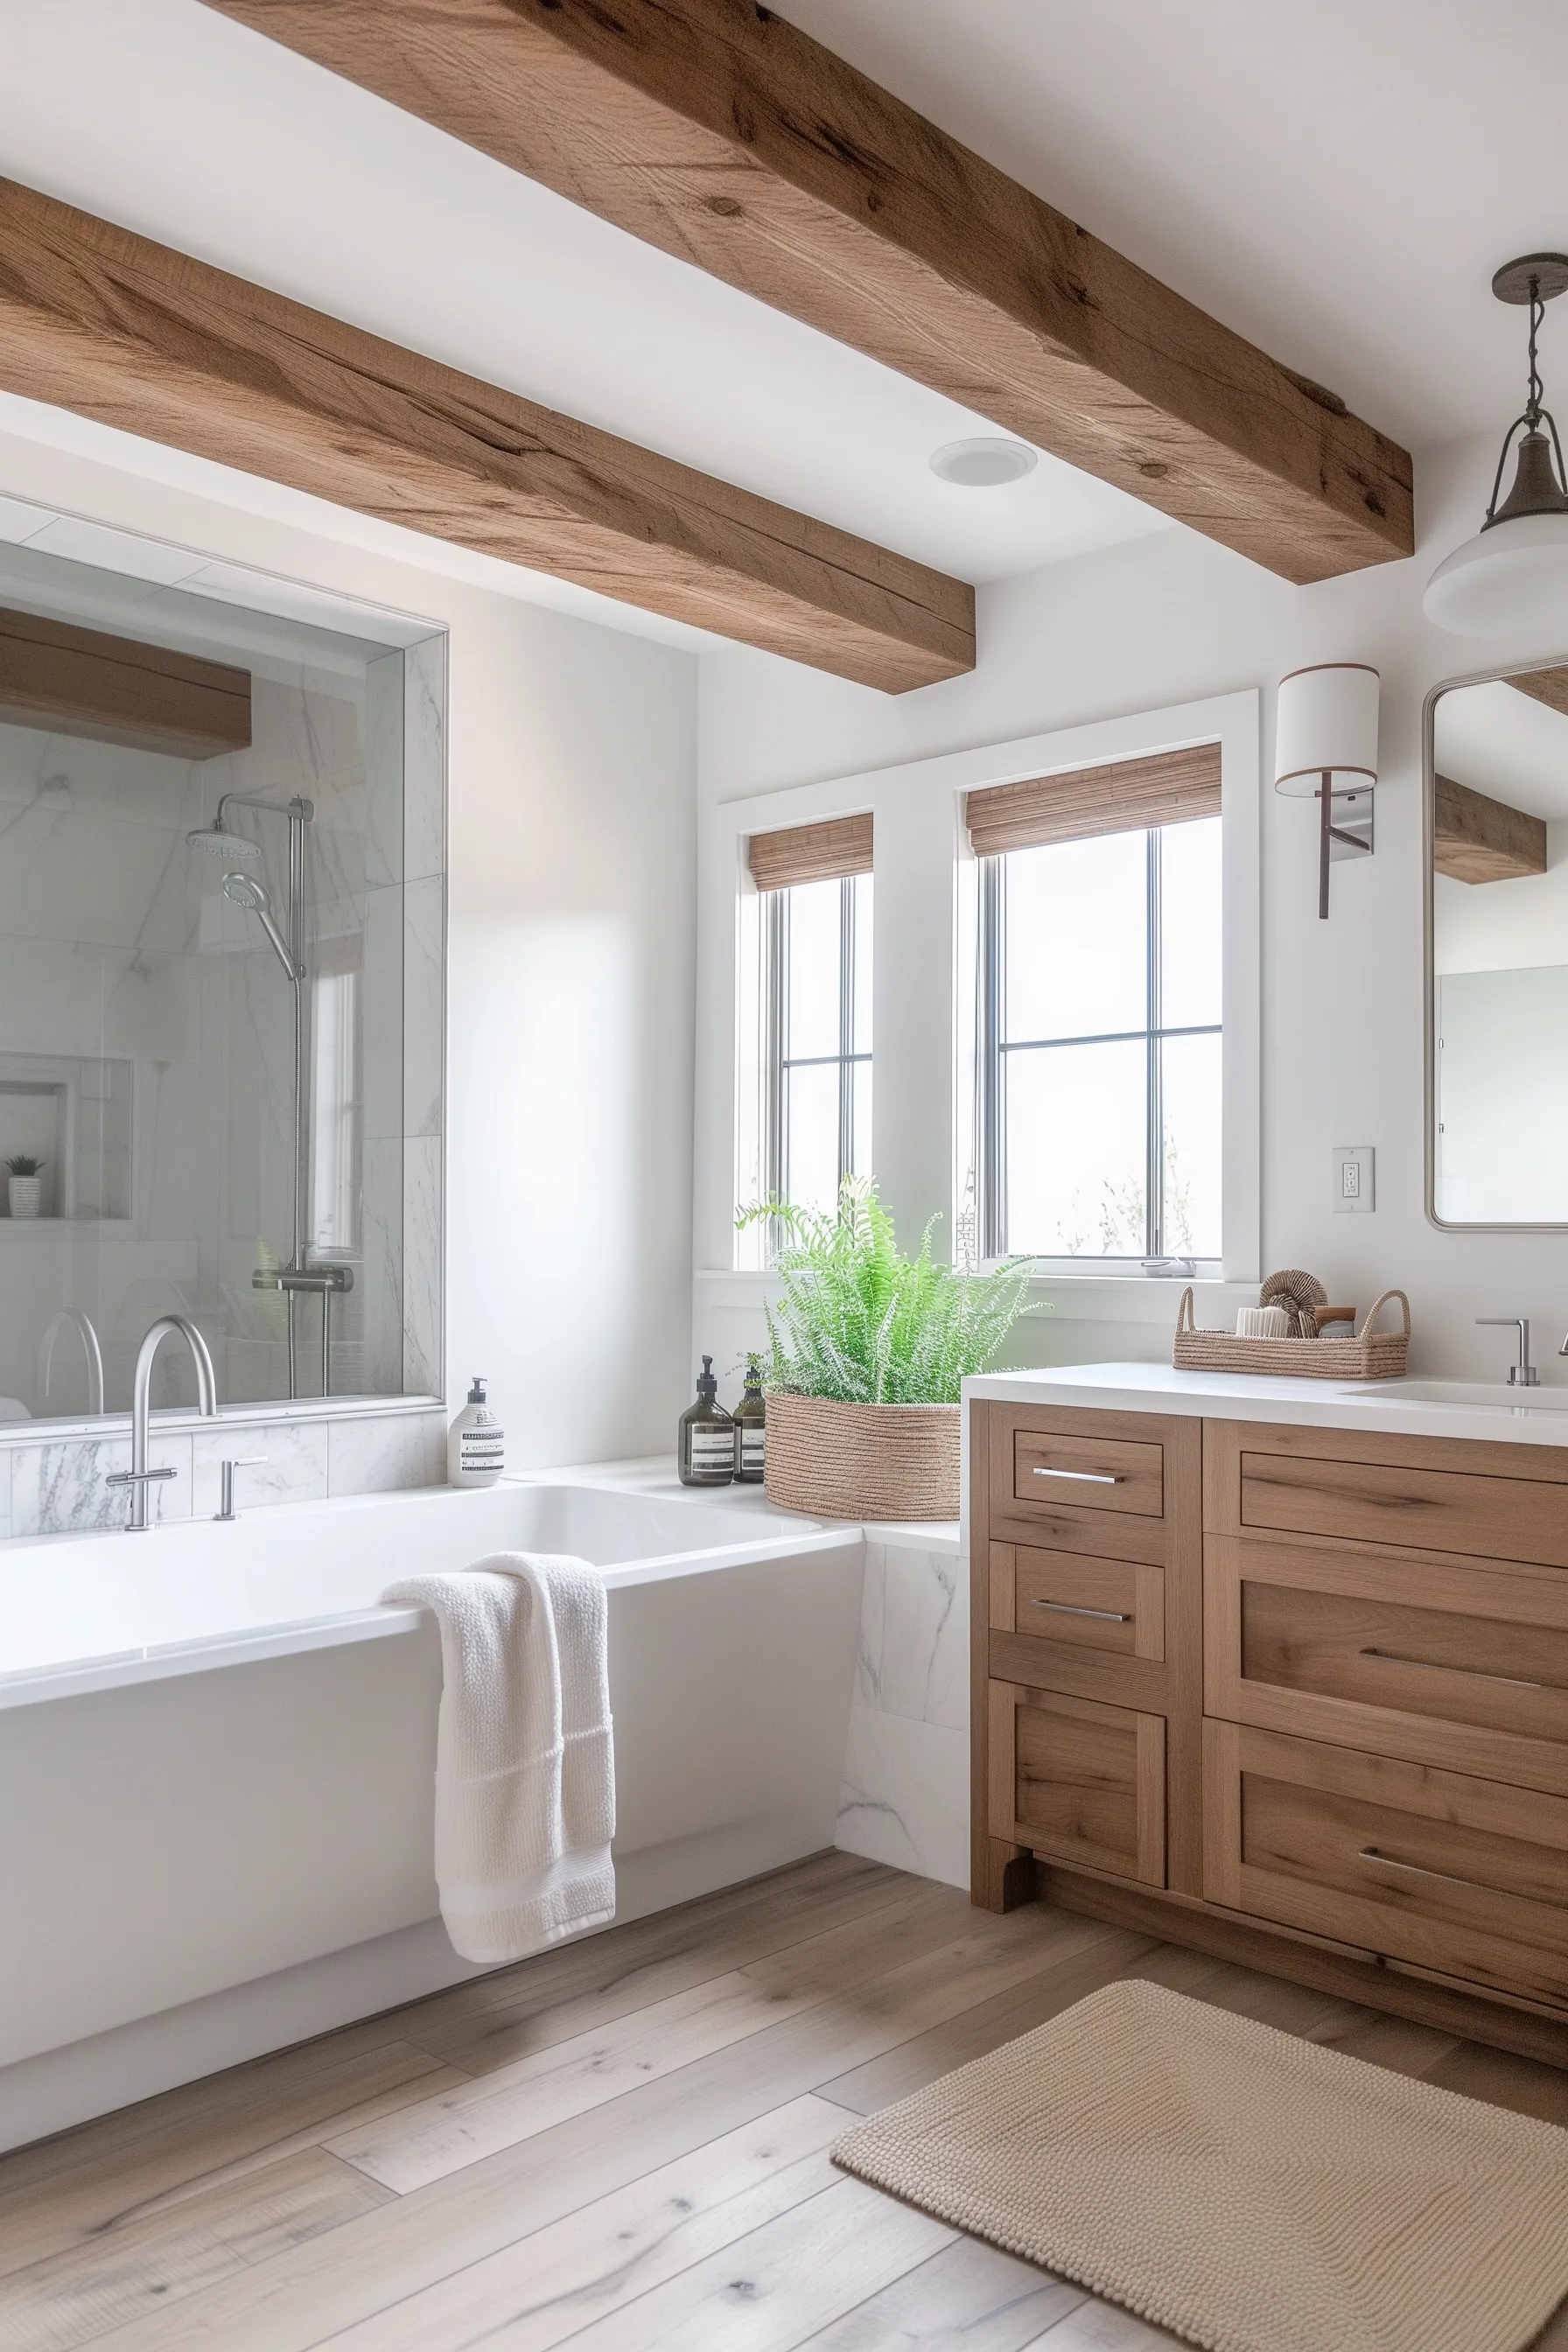 A wooden bathroom with wood beams and a marble bath